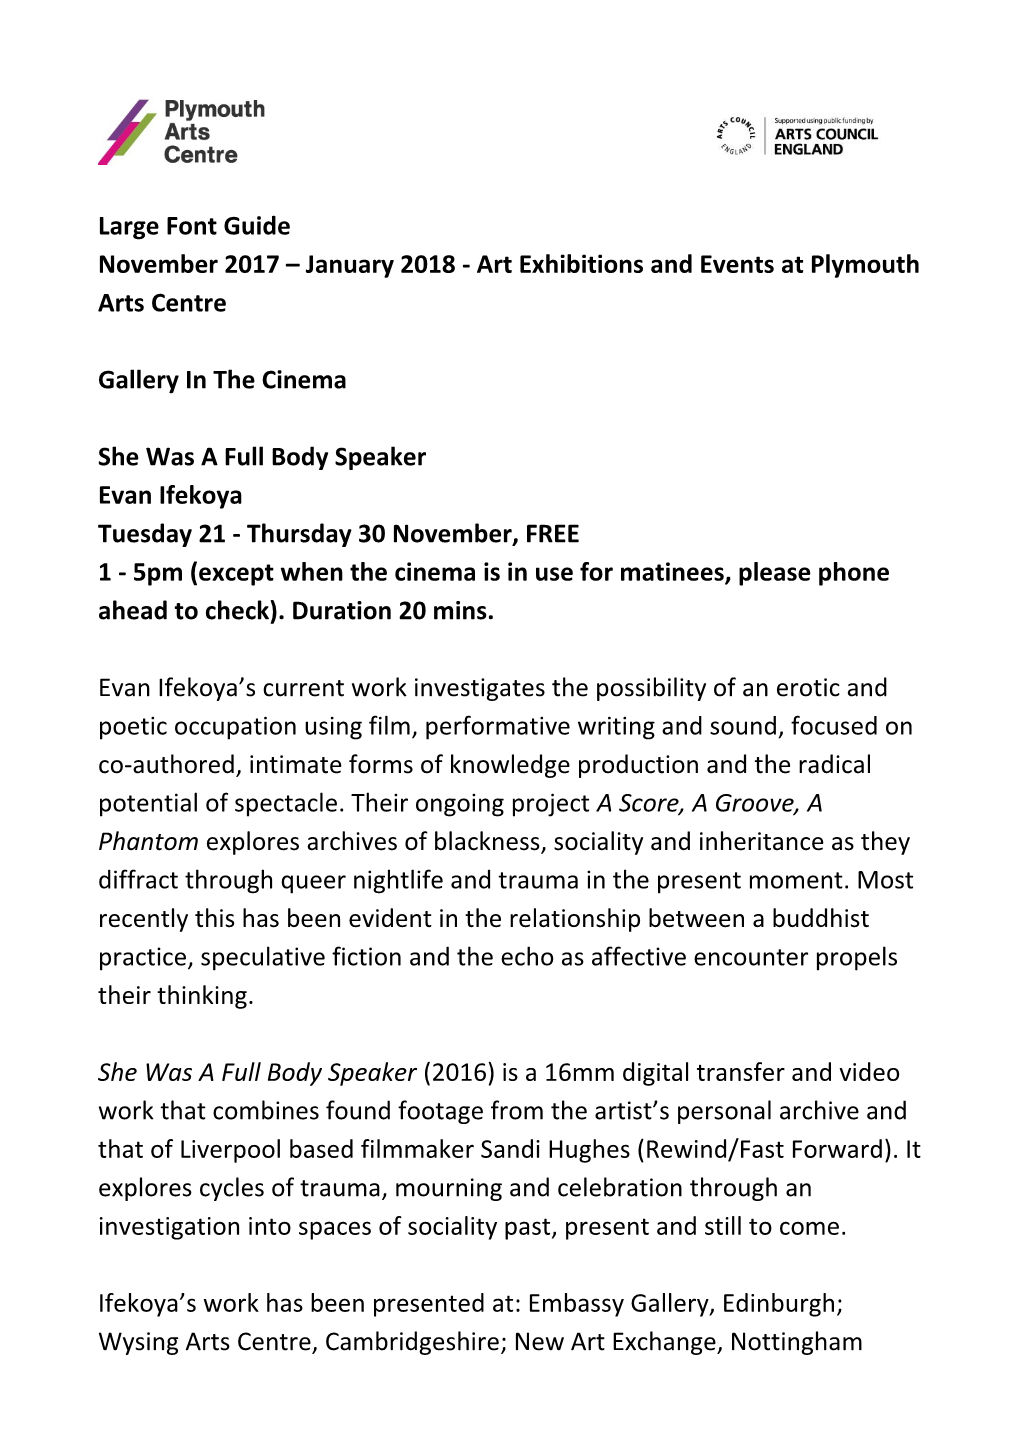 November 2017 January 2018- Art Exhibitions and Events at Plymouth Arts Centre